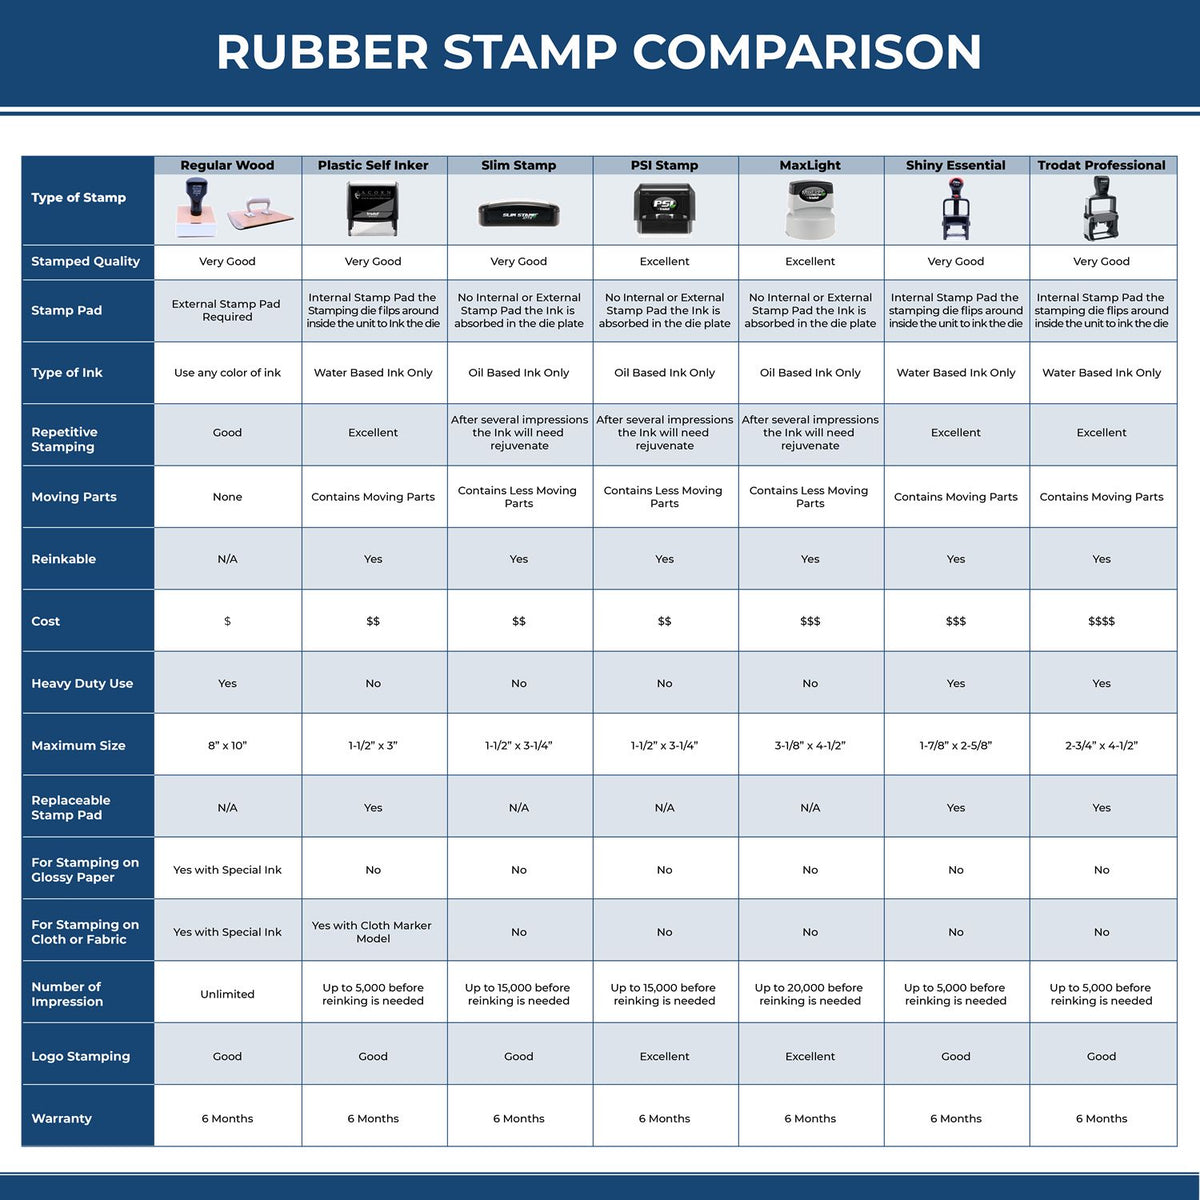 A comparison chart for the different types of mount models available for the PSI Missouri Notary Stamp.